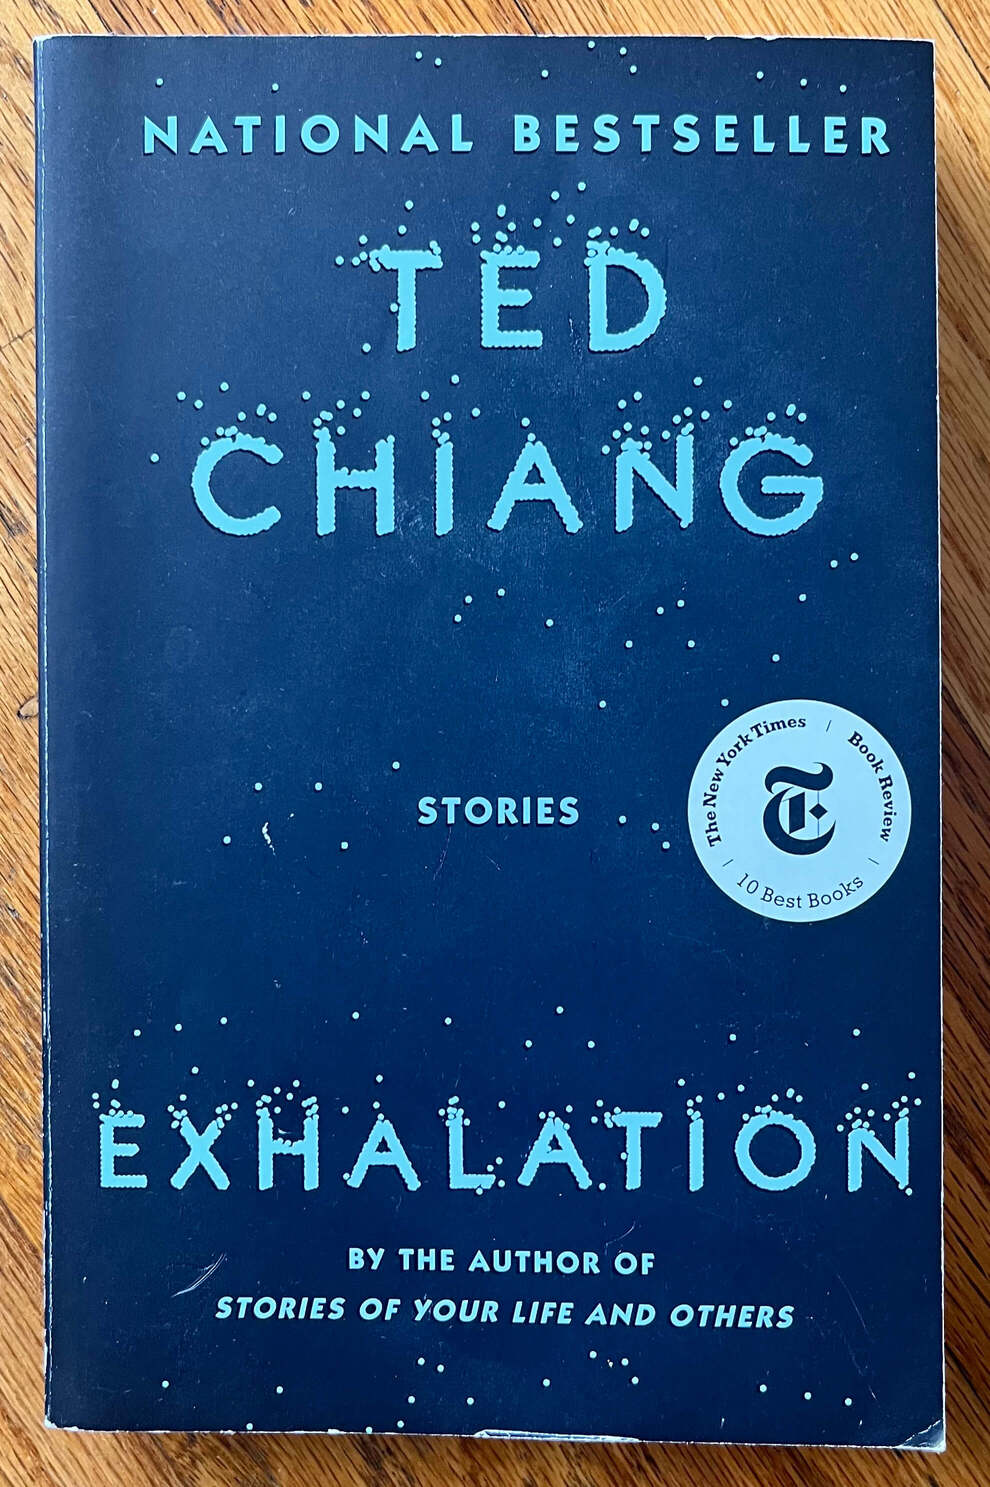 “Exhalation” by Ted Chiang.